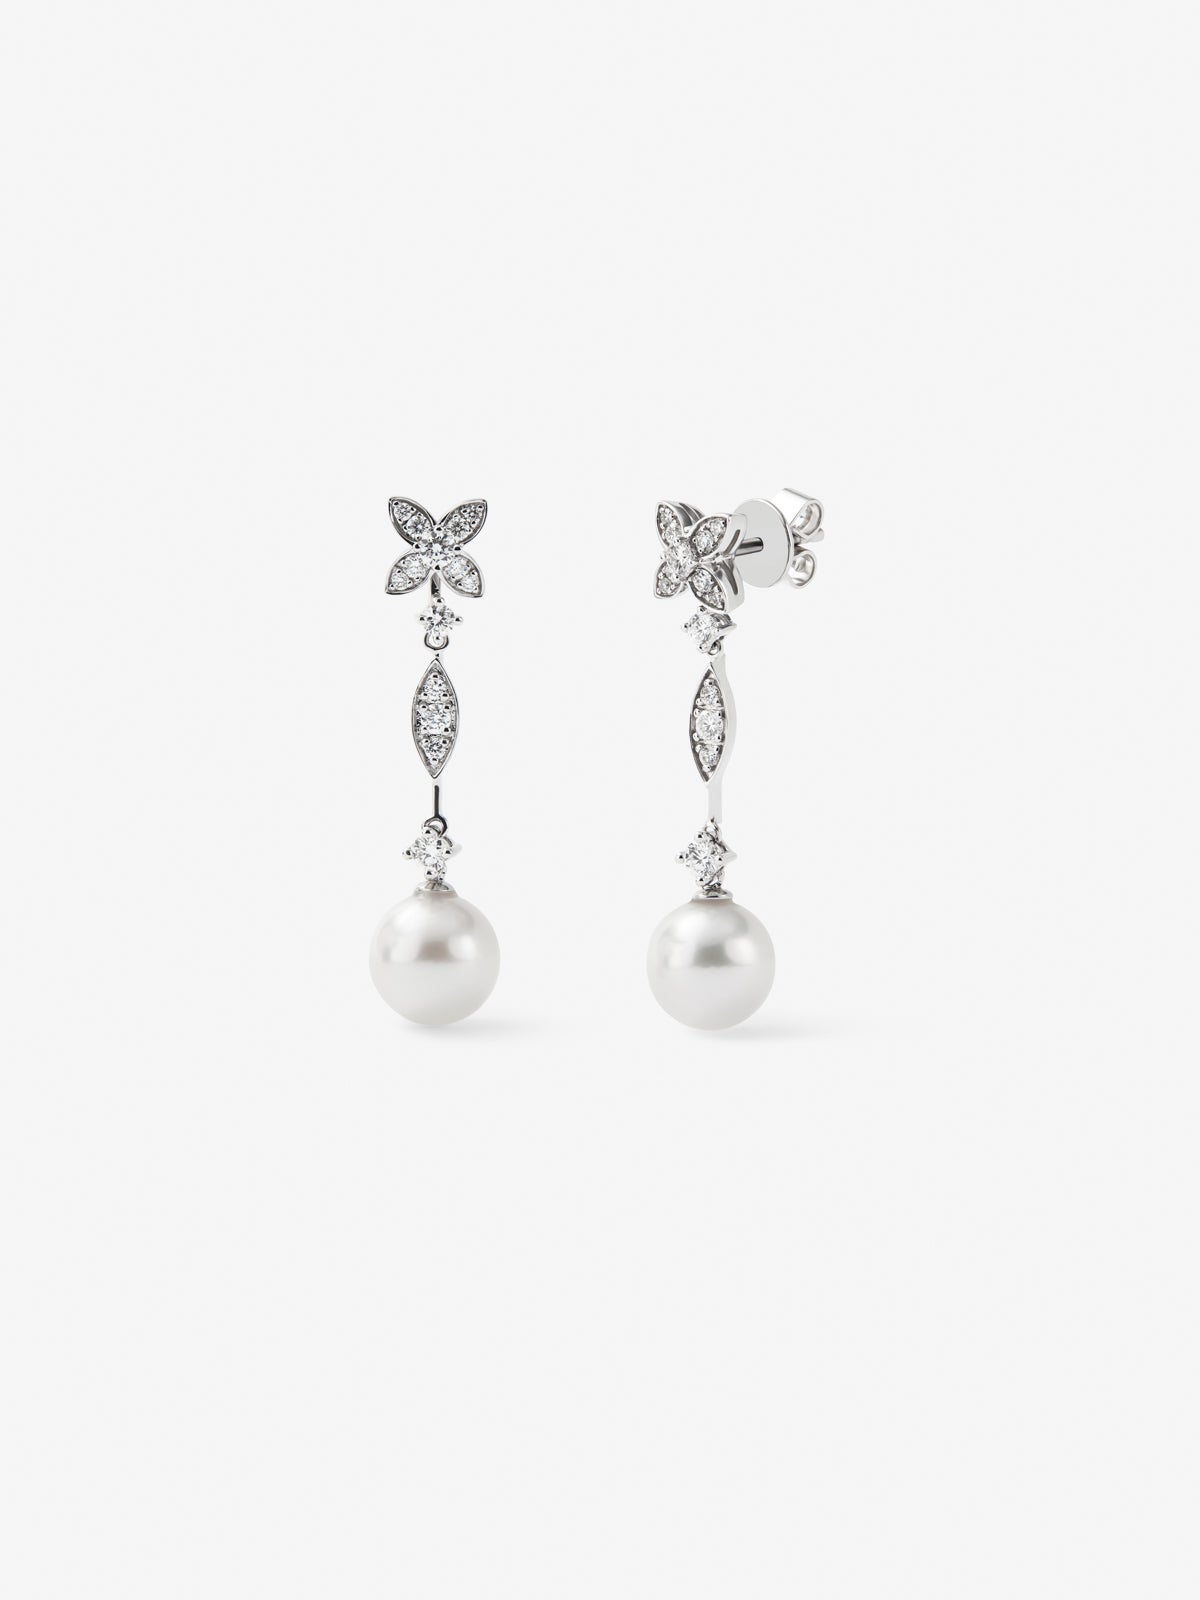 18K white gold earrings with 28 brilliant-cut diamonds with a total of 0.59 cts and 2 8.5 mm Akoya pearls